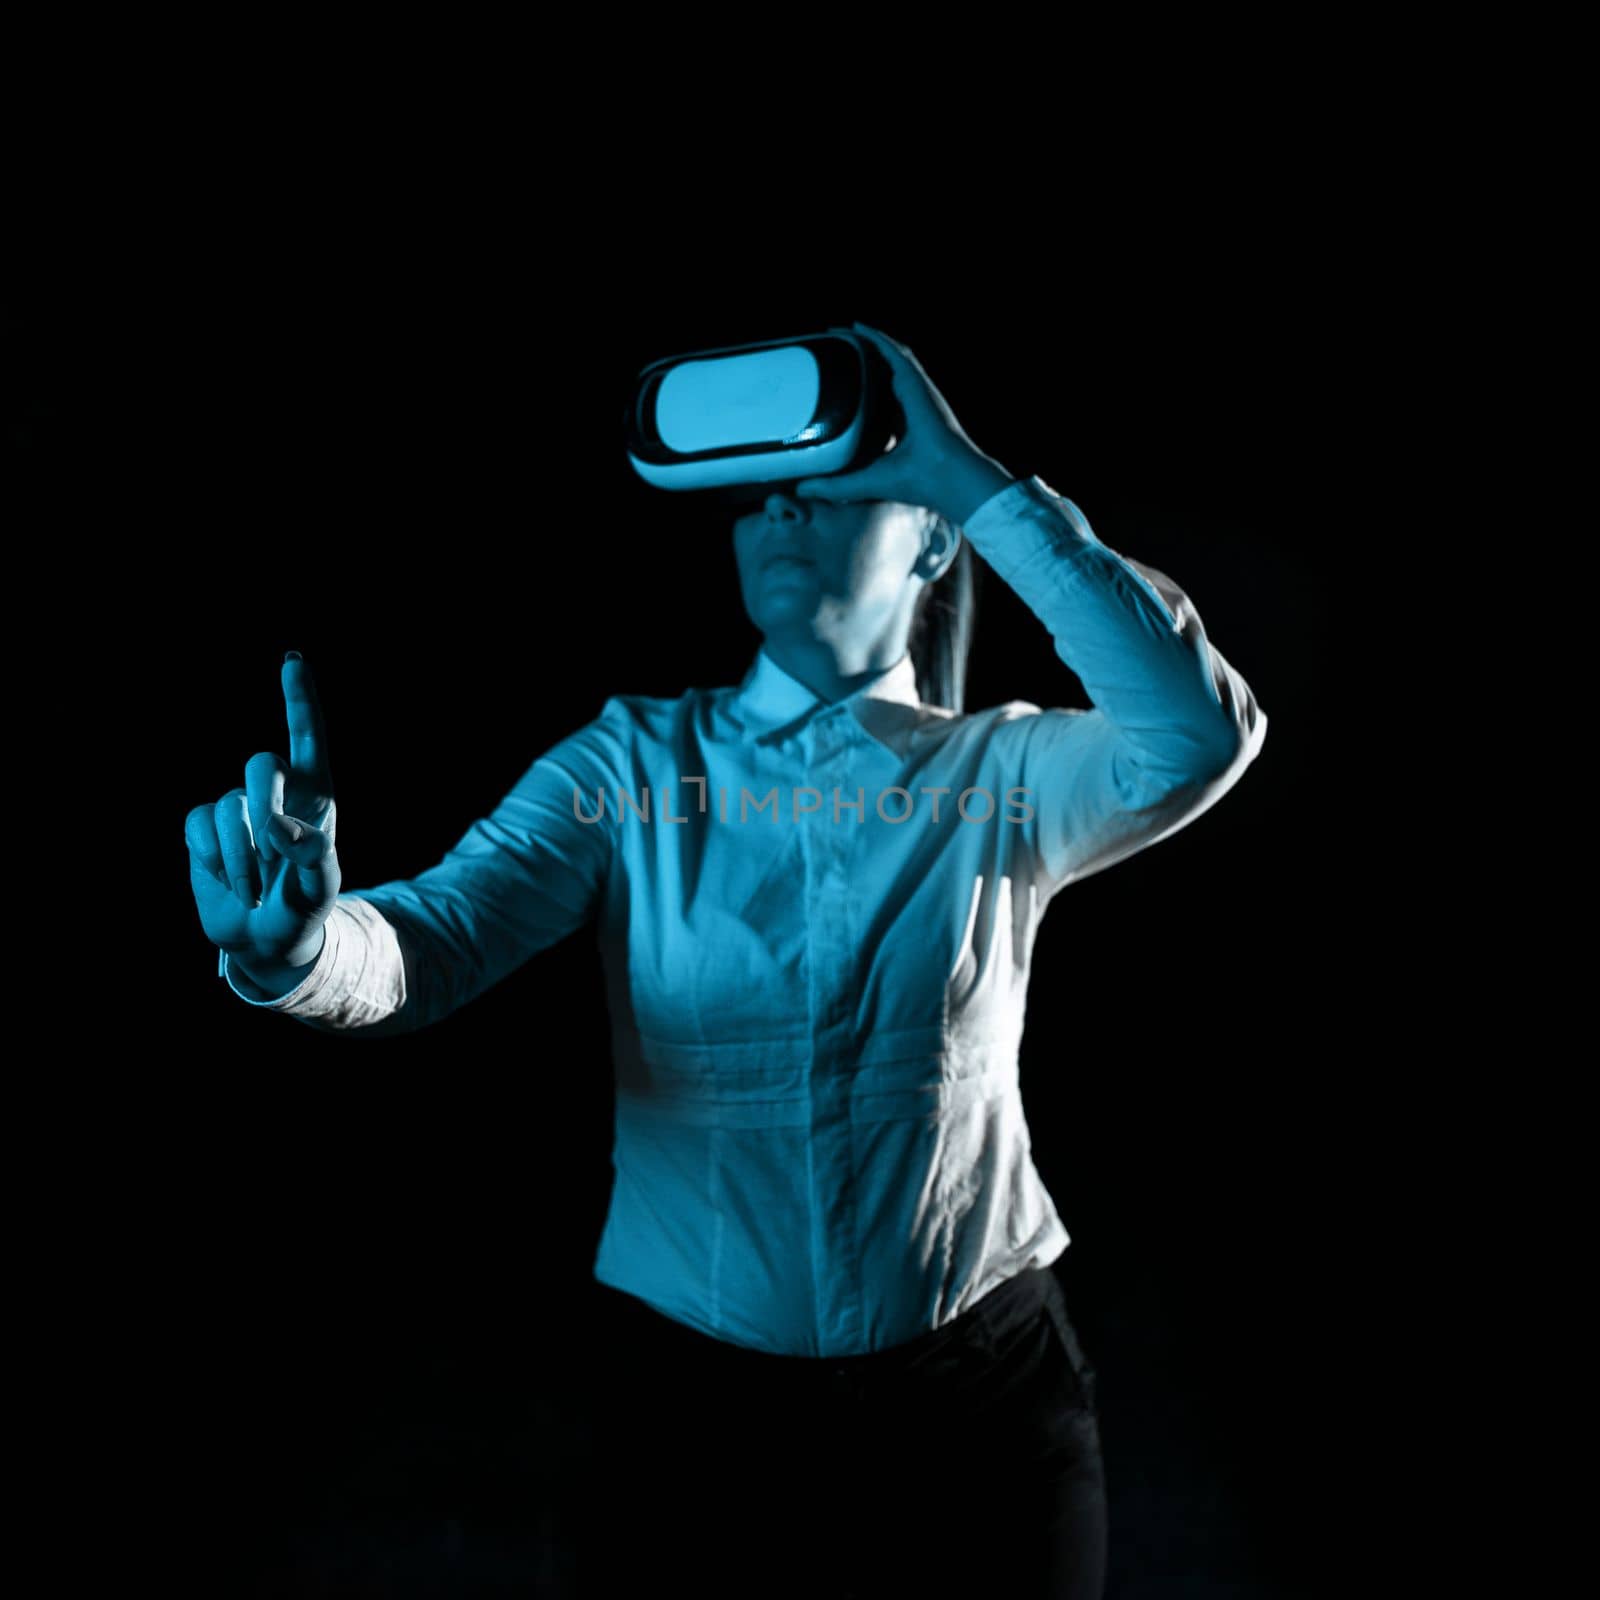 Woman Wearing Vr Glasses And Pointing On Messages With One Finger.